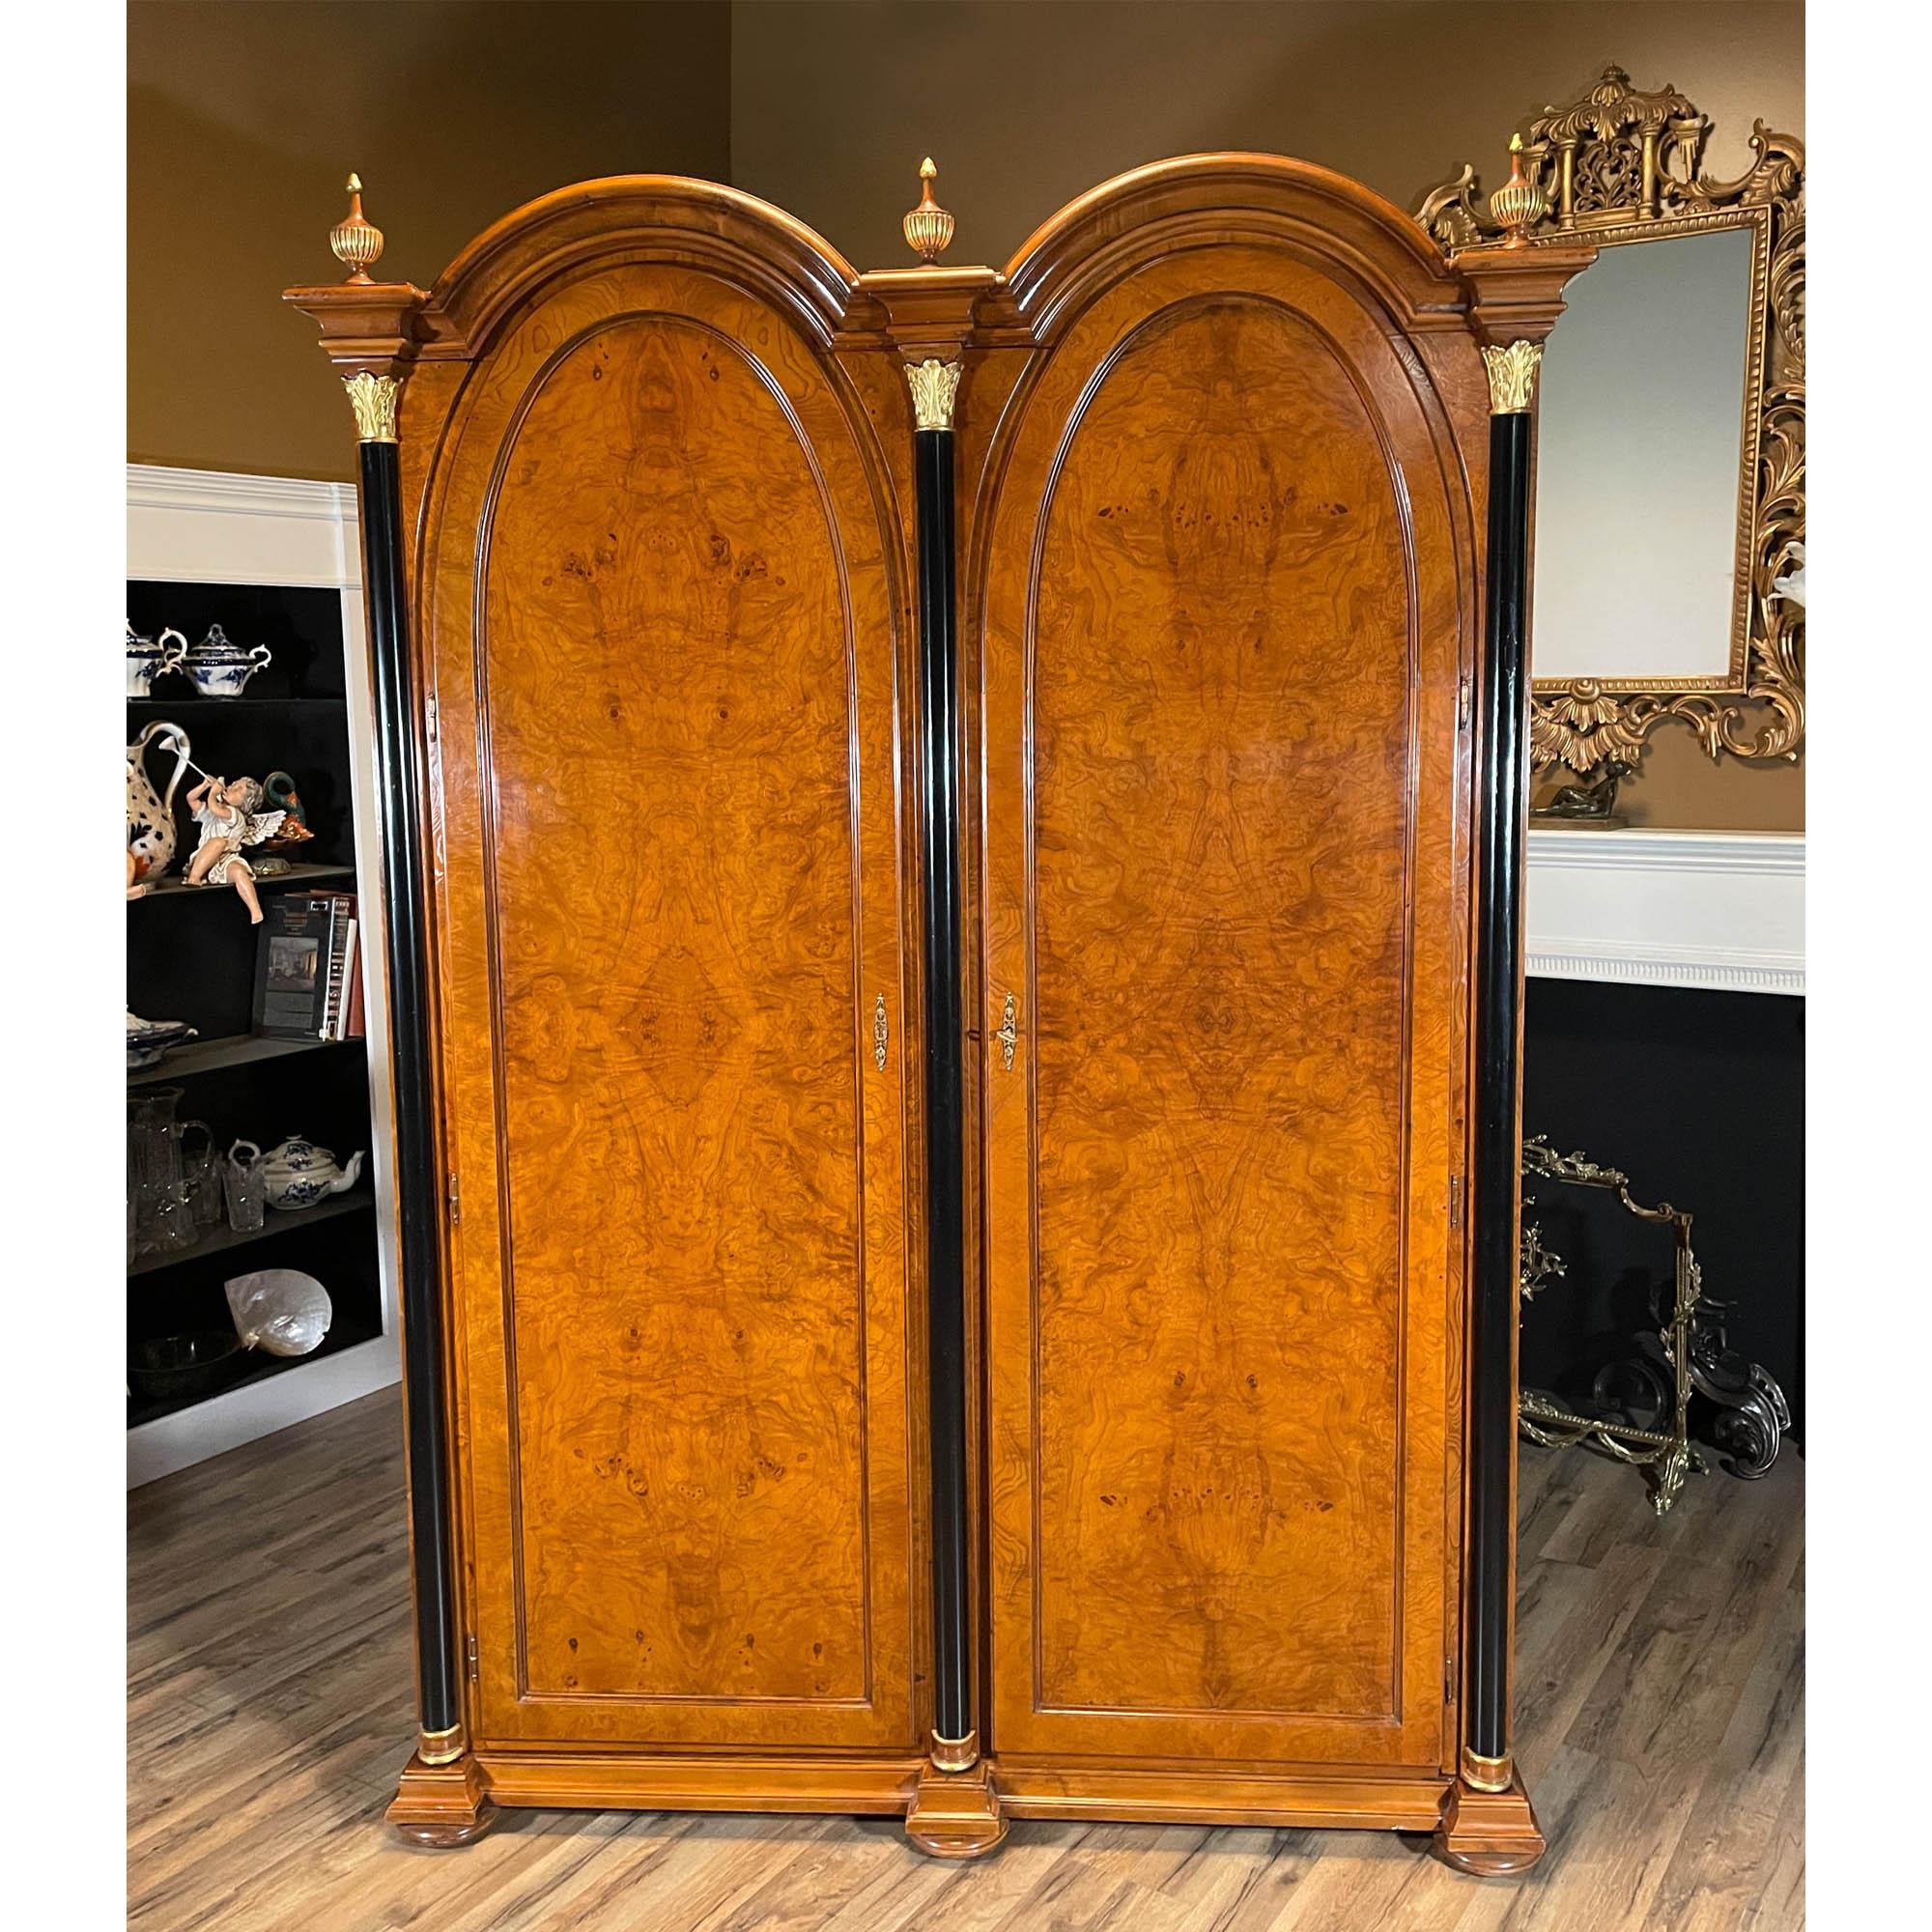 The Vintage Giemme Bar Cabinet was produced in Italy and is brought to you now by Niagara Furniture. The bar cabinet has a lot of great features that combine to make it a show stopper. With finely detailed burled veneers throughout the cabinet is